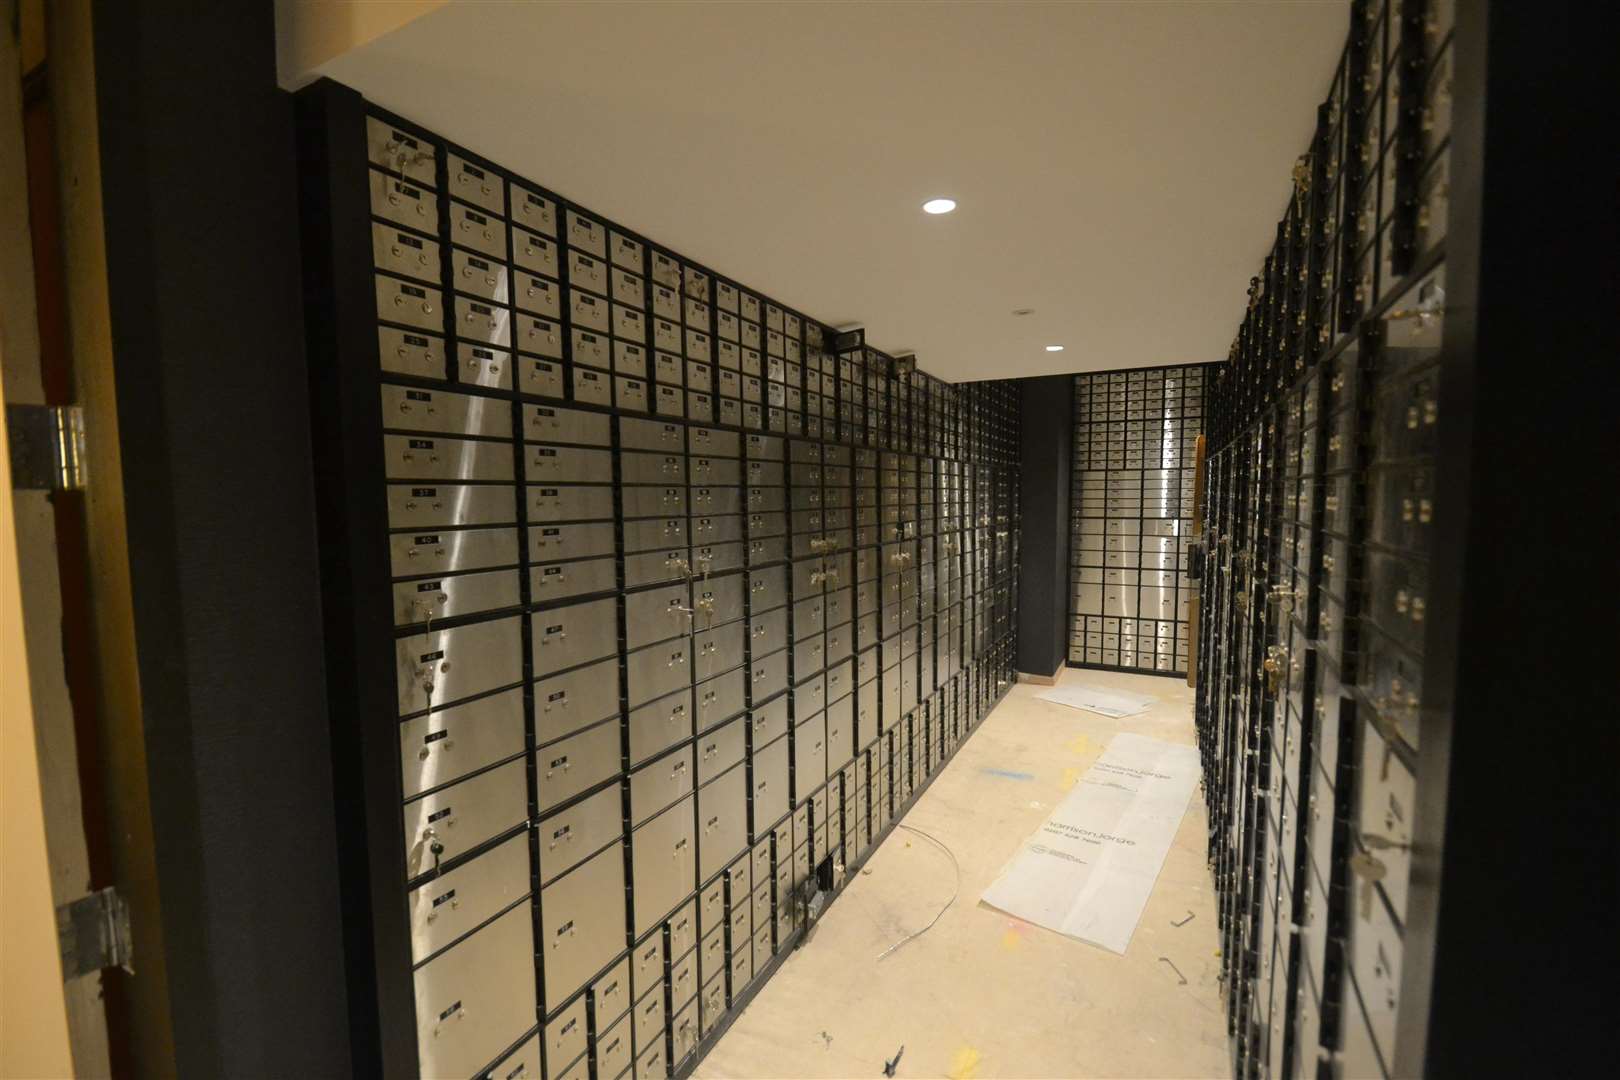 The store's safety deposit boxes. Picture: Steve Salter (5868317)